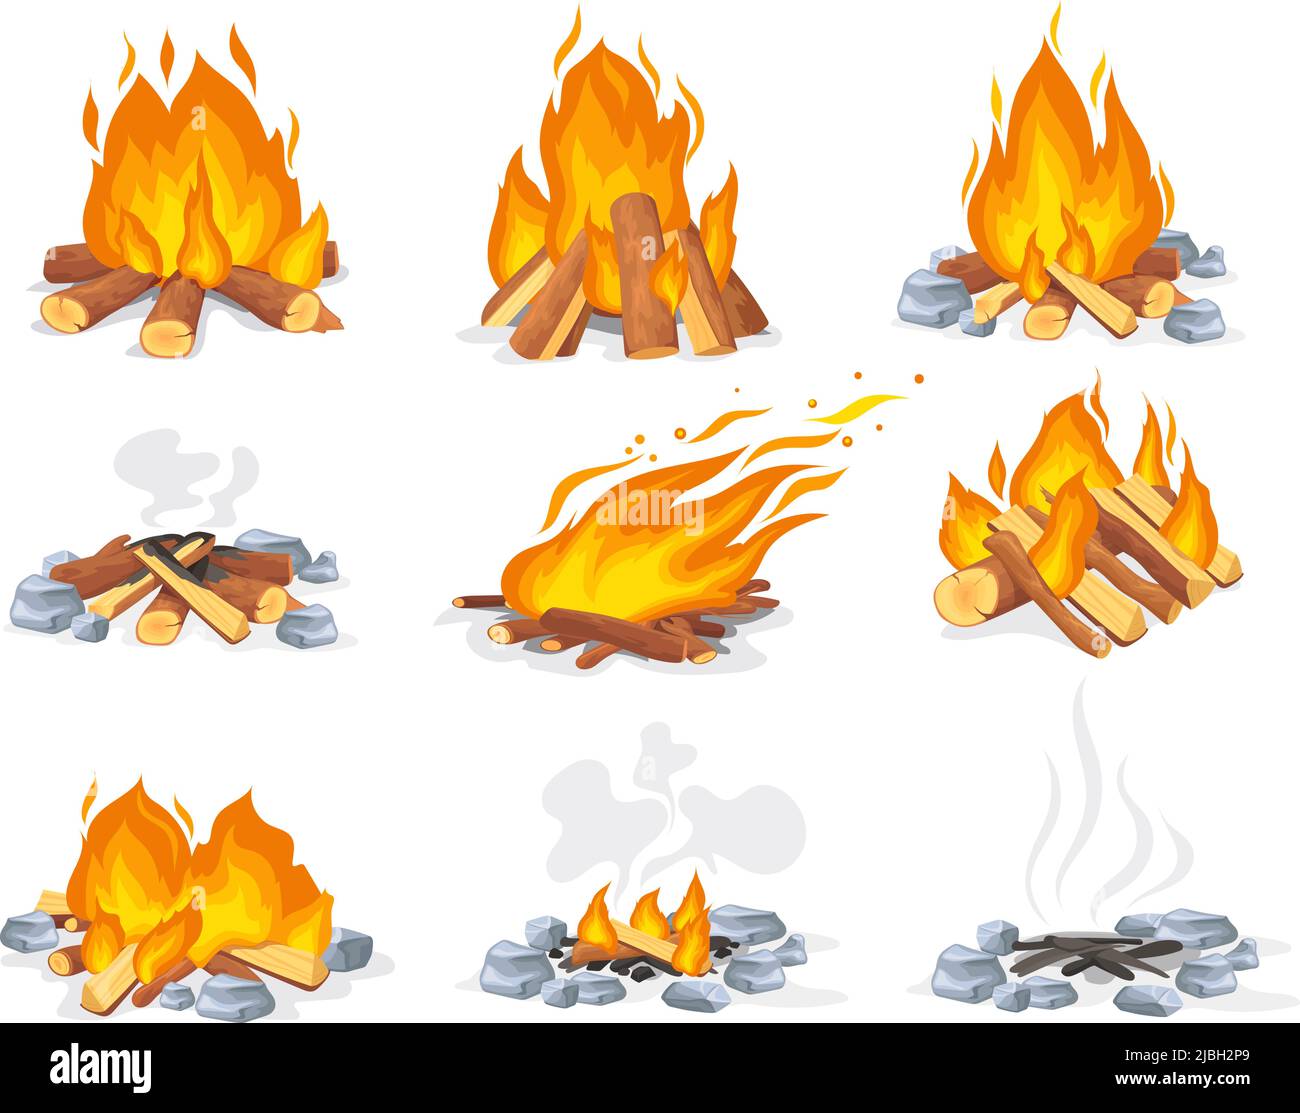 Cartoon Wood Campfire Wooden Logs For Camping Bonfire Fire Wood Wood  Industry Materials Stacked Brushwood And Firewood Vector Illustration Set  Wooden Fireplace Collection Stock Illustration - Download Image Now - iStock